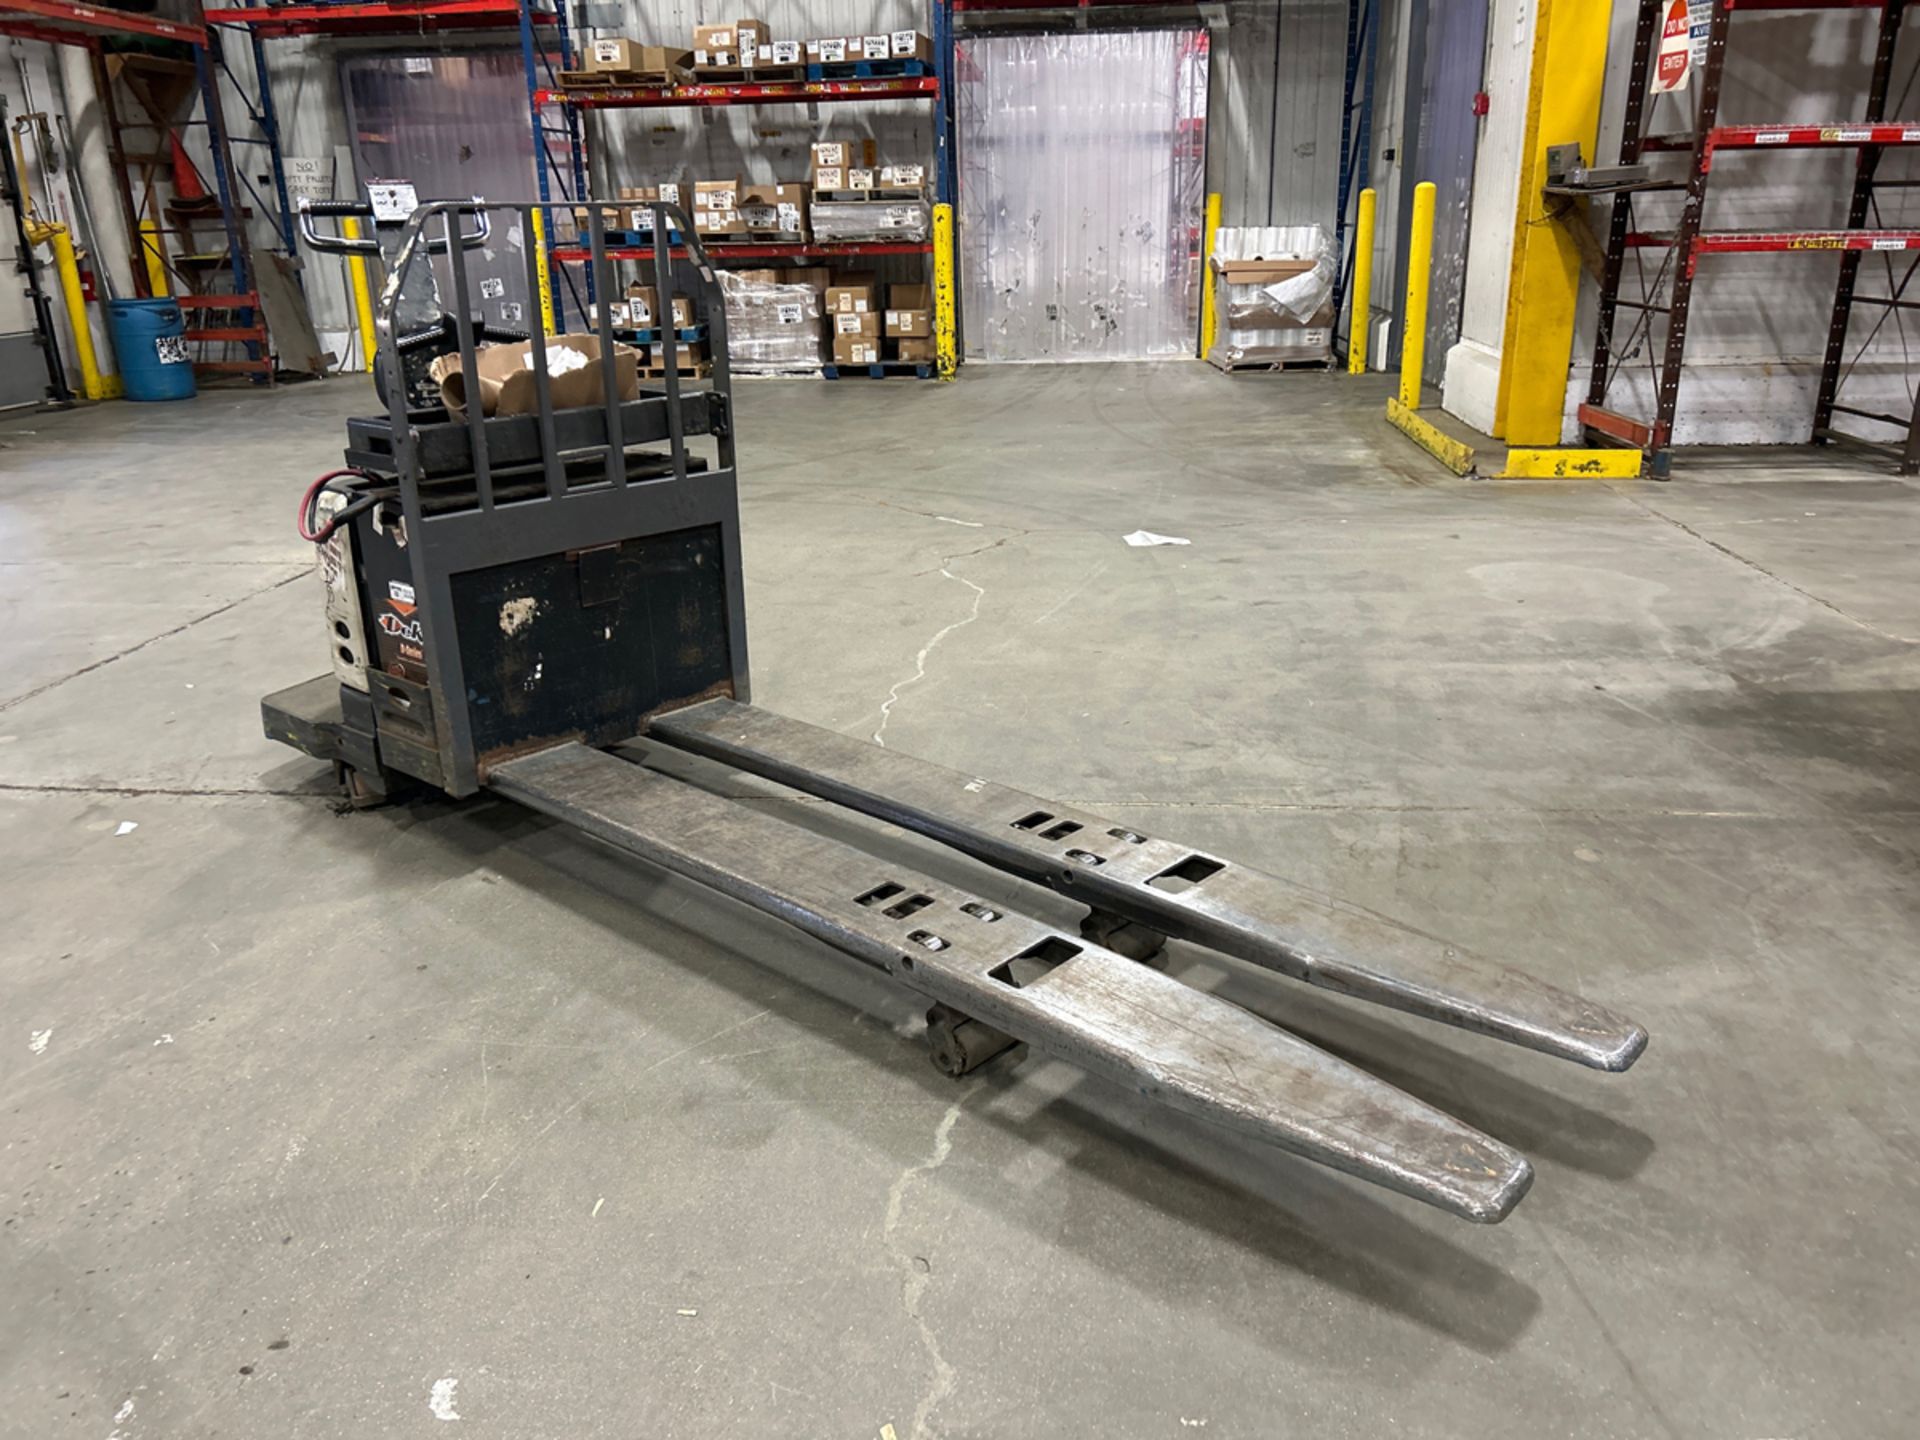 Crown PE4000-60 6,000lbs Electric 24V Rider Pallet Jack w/ Charger